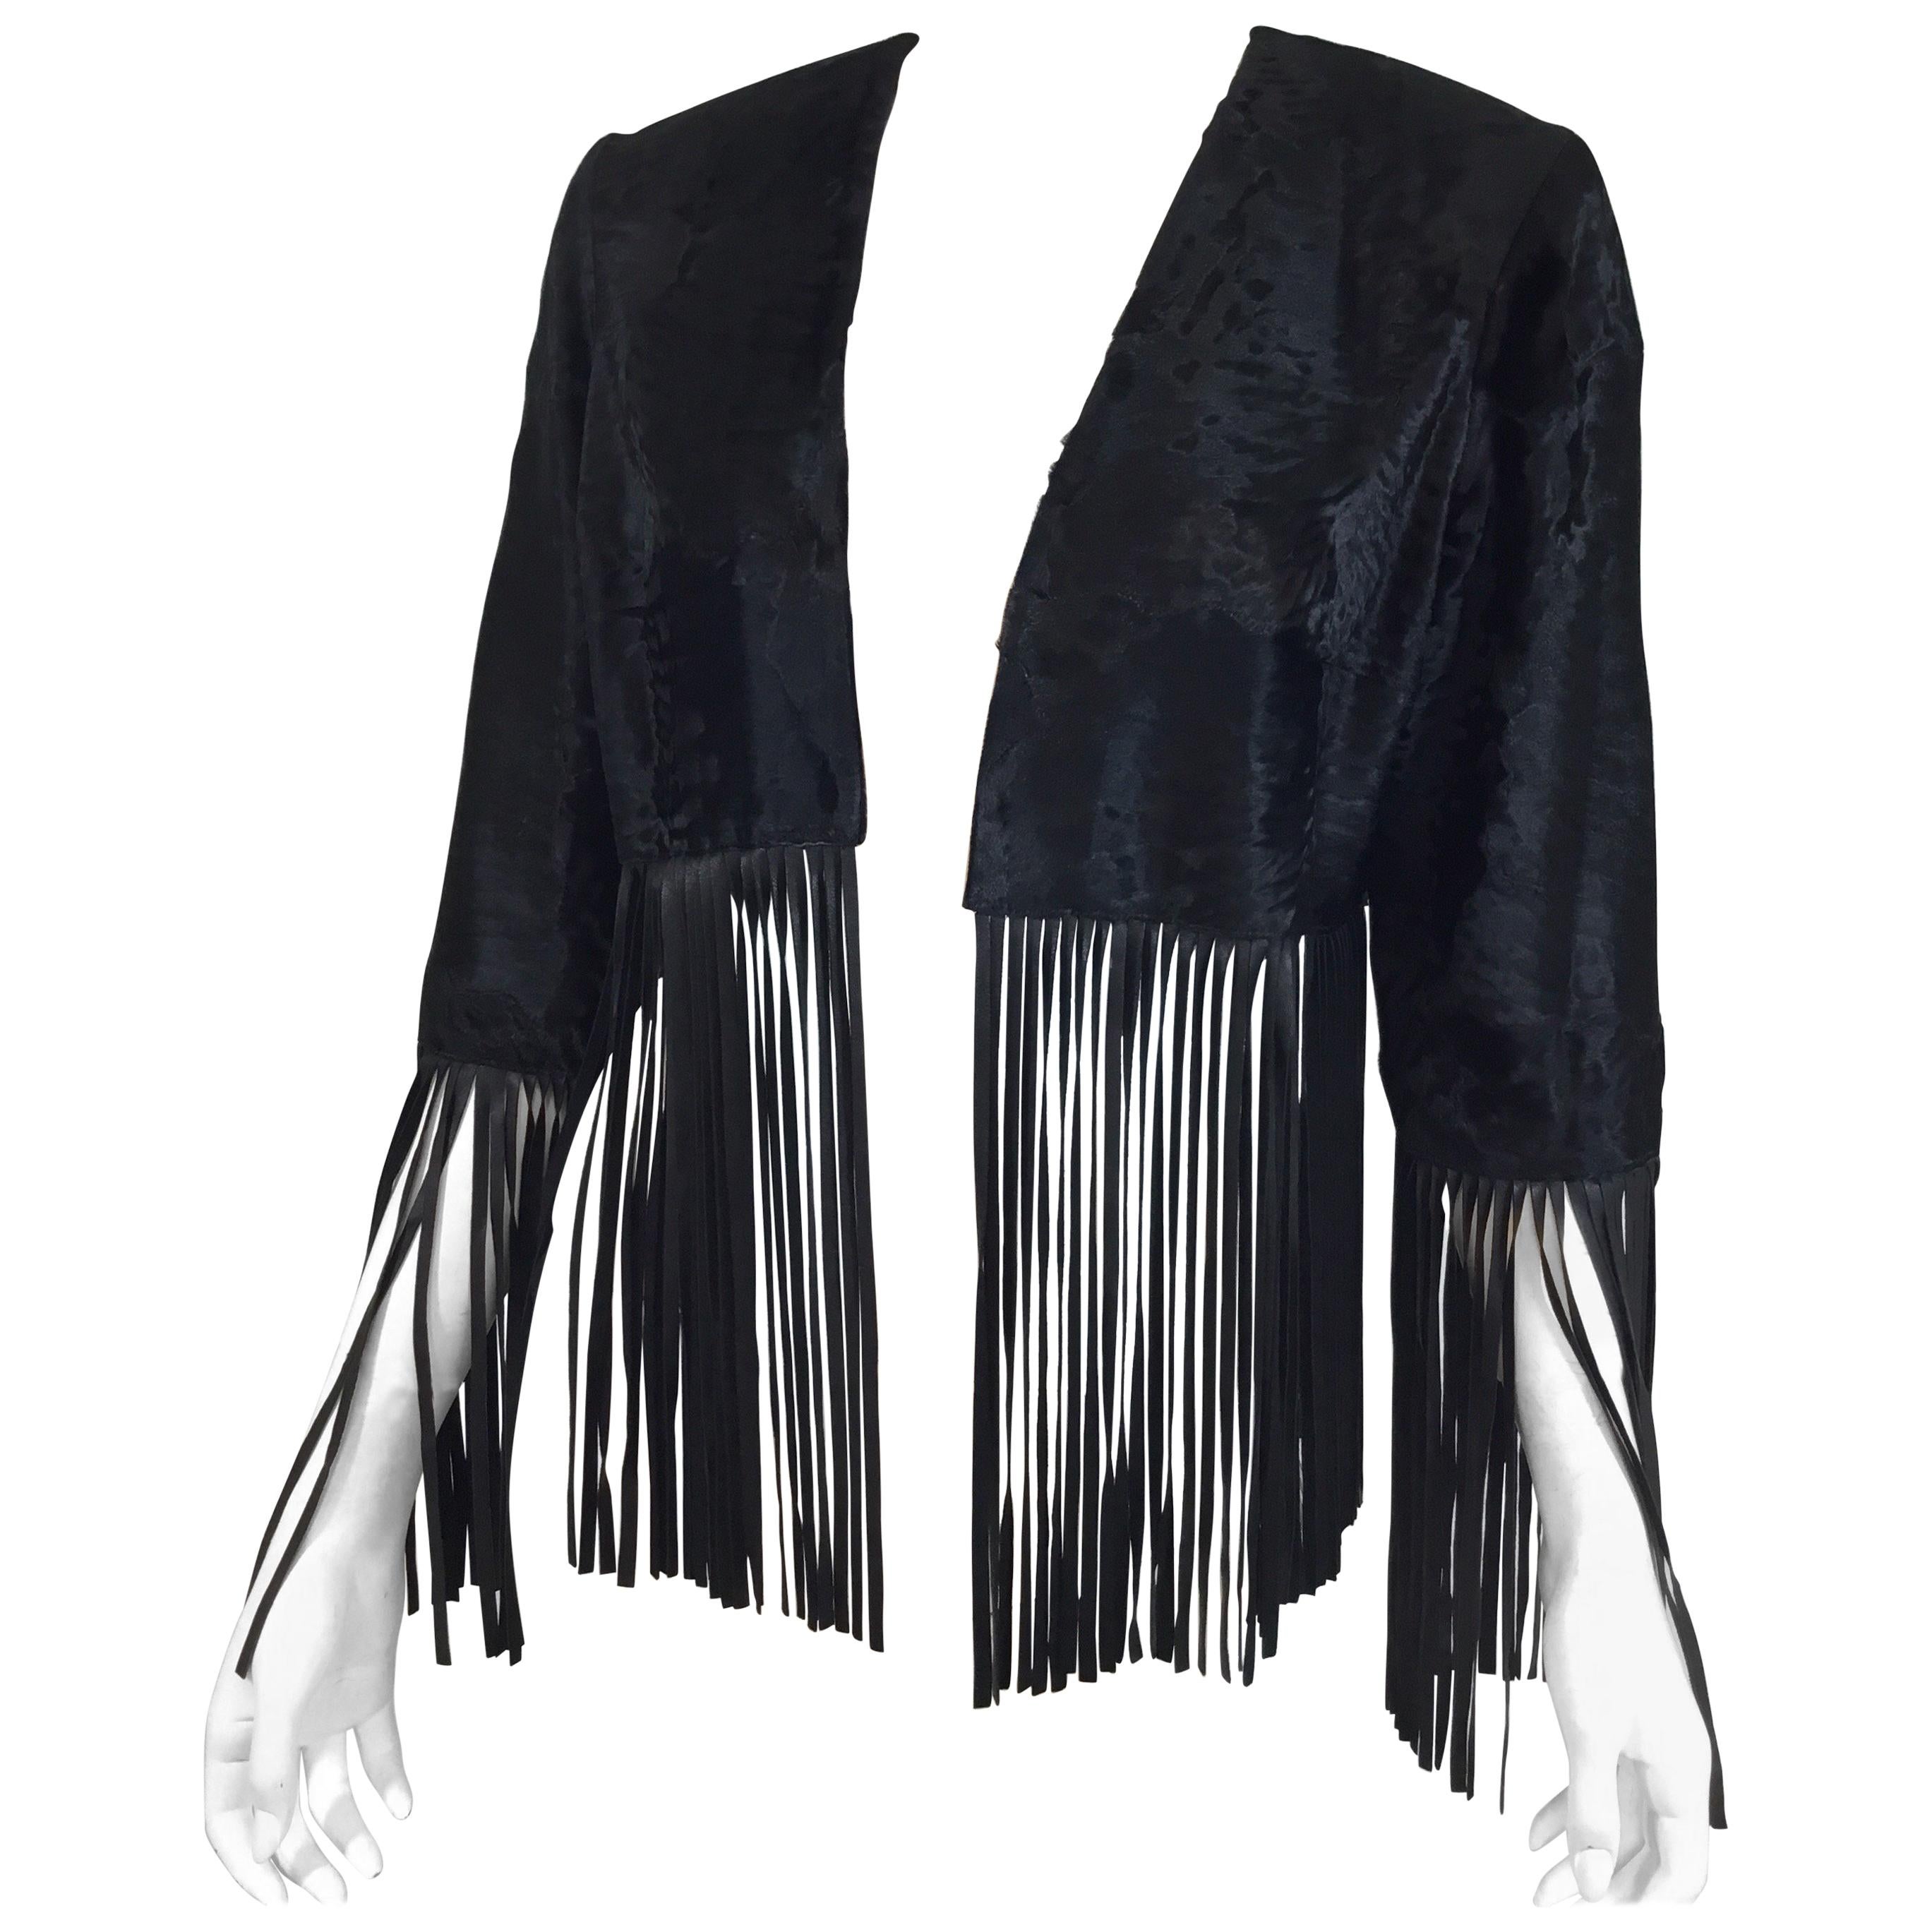 Bisang Couture Broadtail Jacket with Leather Fringe